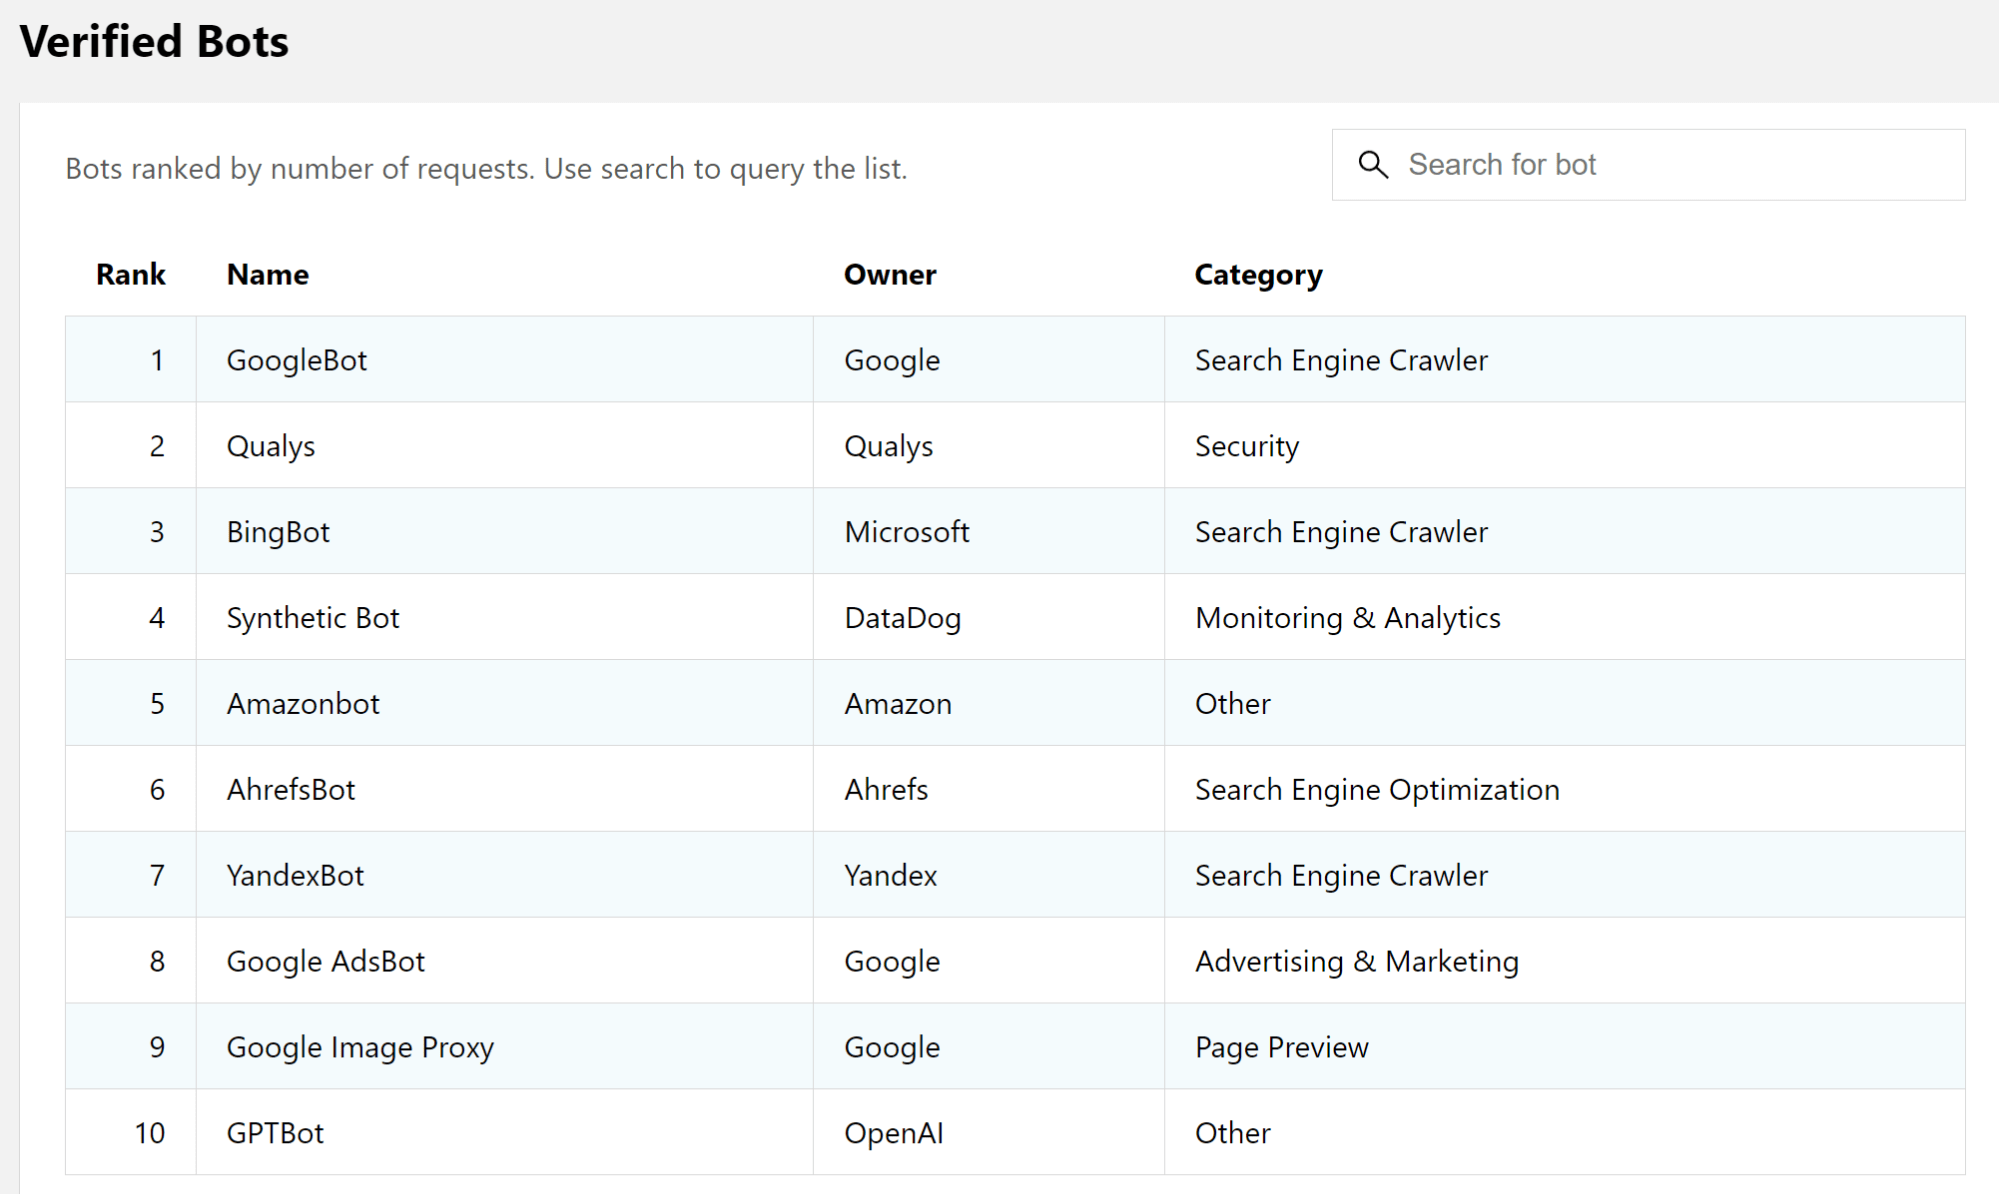 Cloudflare good bots list shows AhrefsBot at number 6